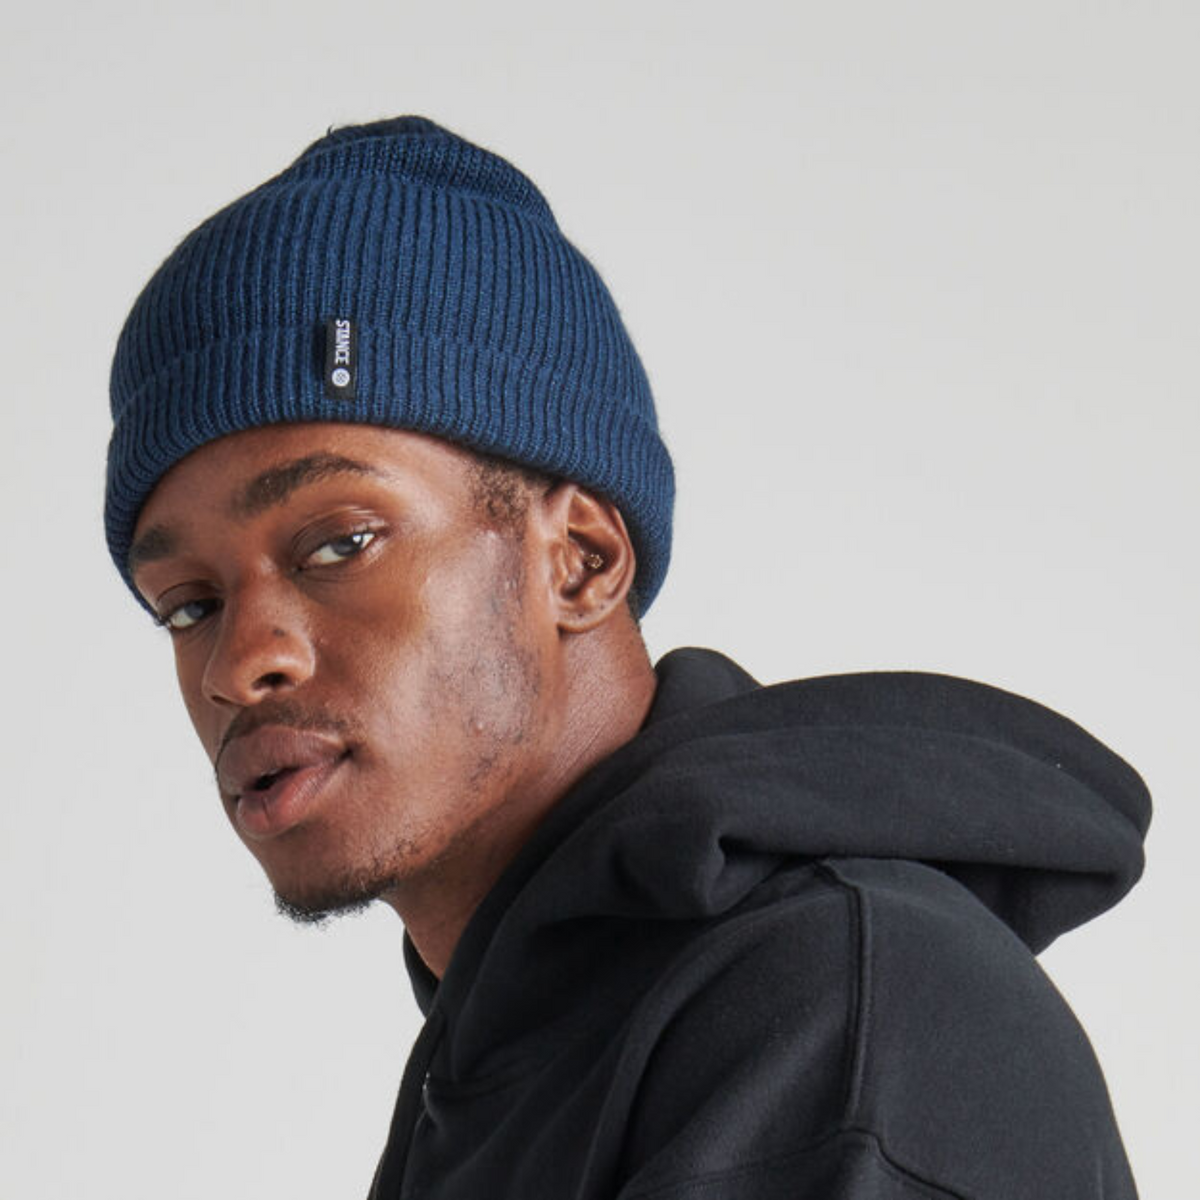 Stance Icon 2 Beanie in navy blue worn by model